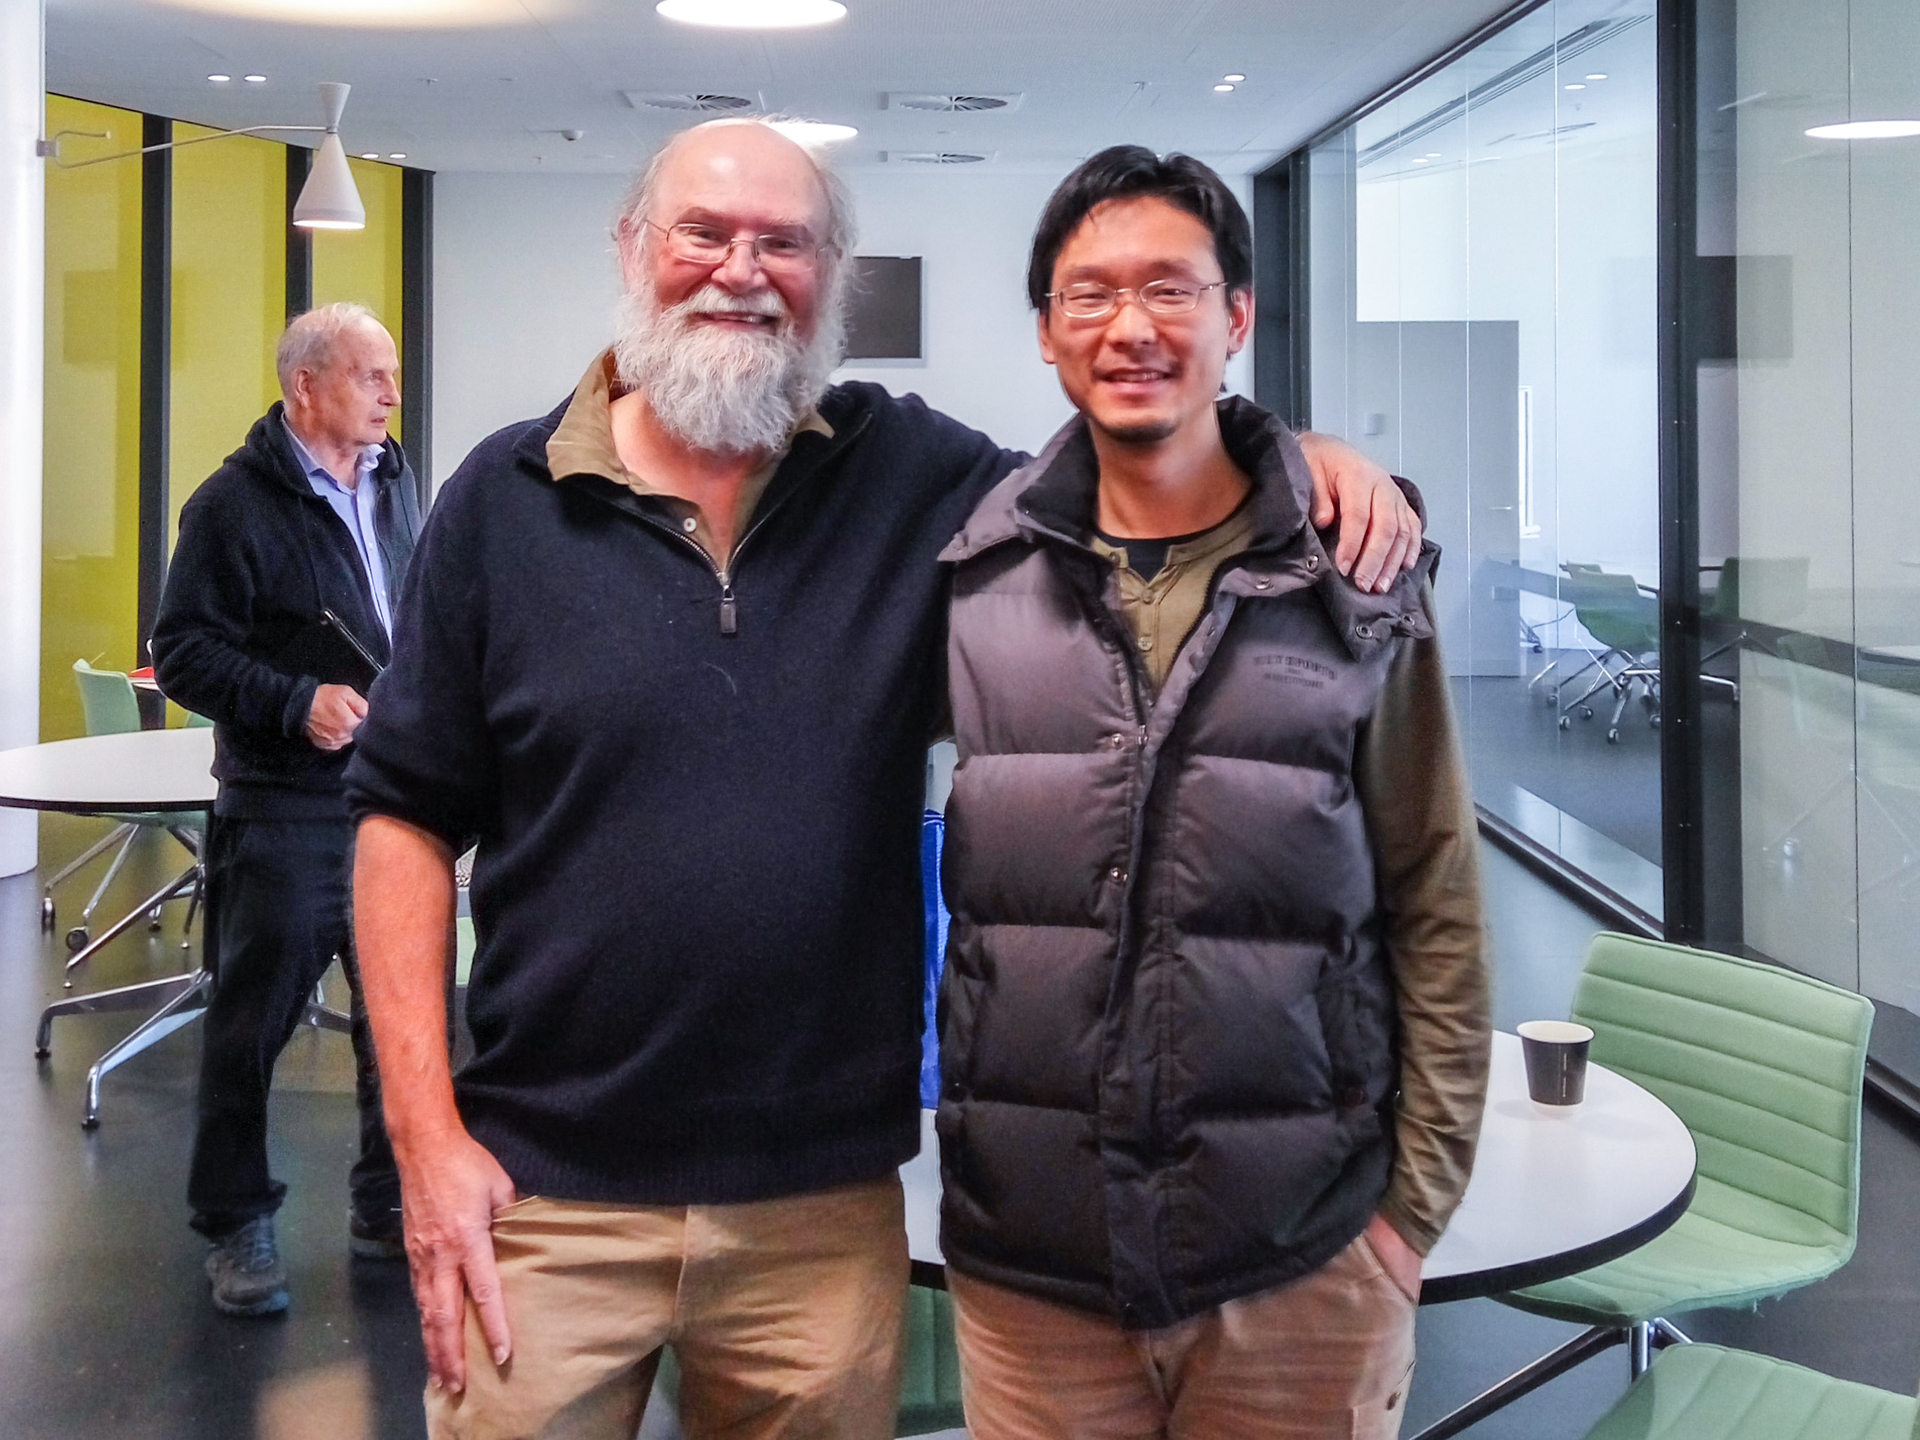 When Professor Wong first came to Australia to teach at the University of Technology Sydney (UTS), he received a great deal of care from his former department chair, whom he still misses greatly. This is a photo they took when the department chair retired.